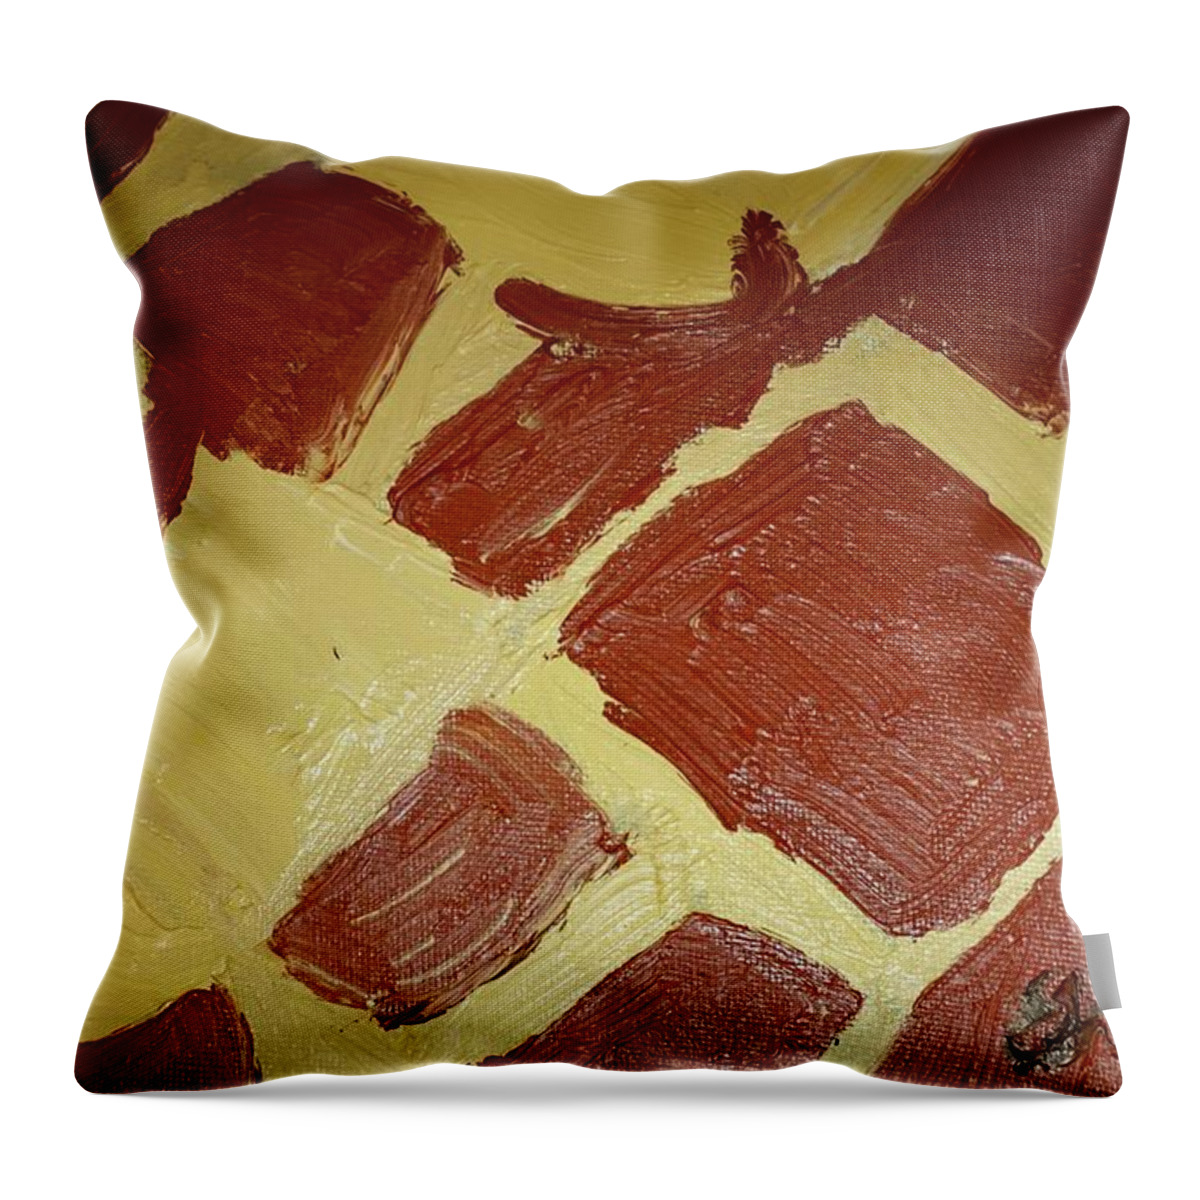 Yellow Throw Pillow featuring the painting Turtle Lamp by Shea Holliman